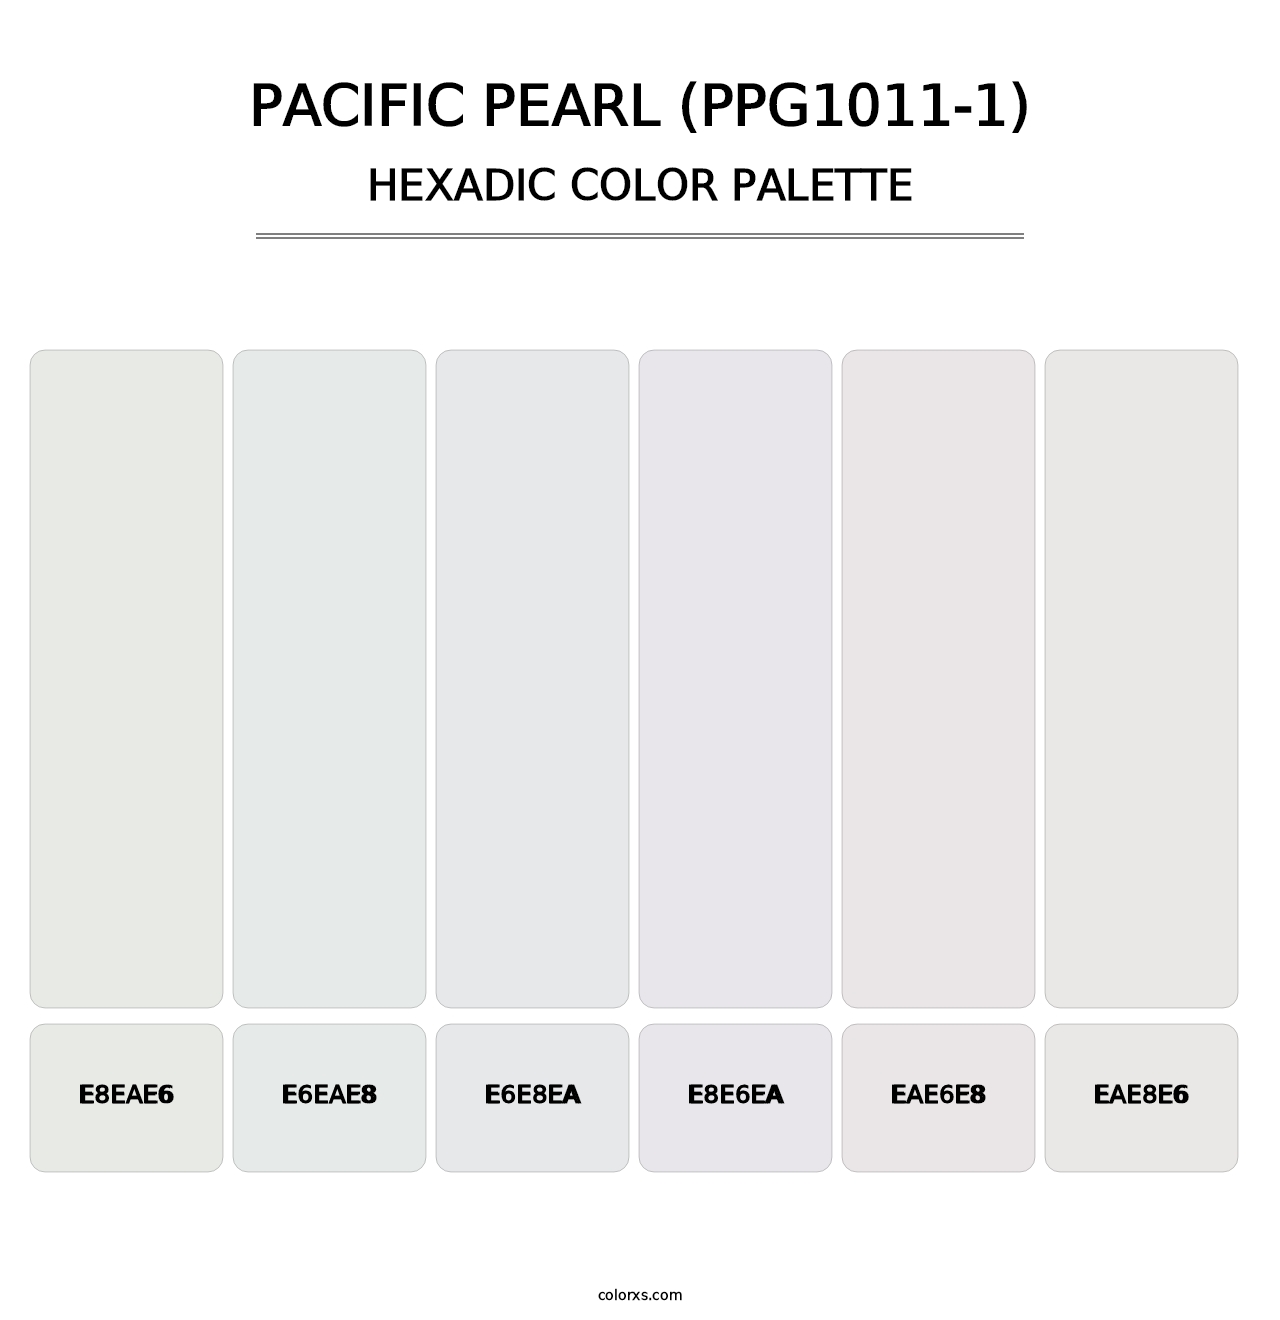 Pacific Pearl (PPG1011-1) - Hexadic Color Palette